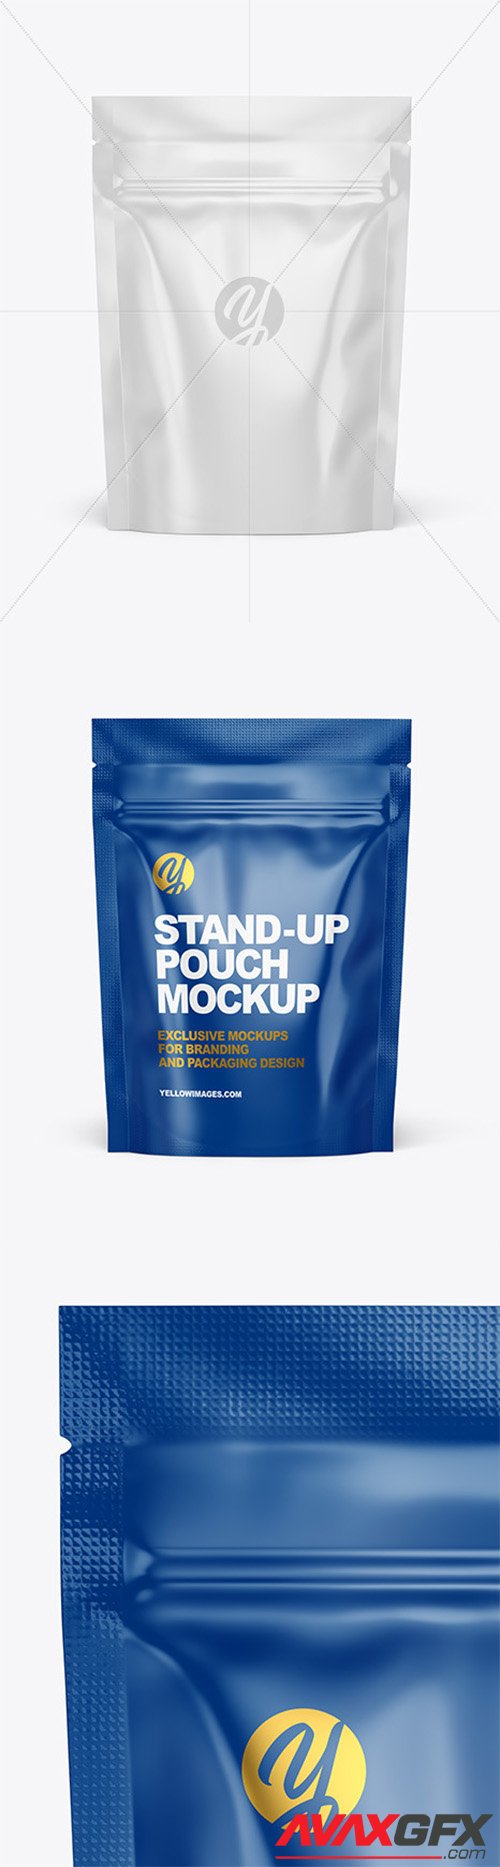 Glossy Stand-up Pouch Mockup 57498